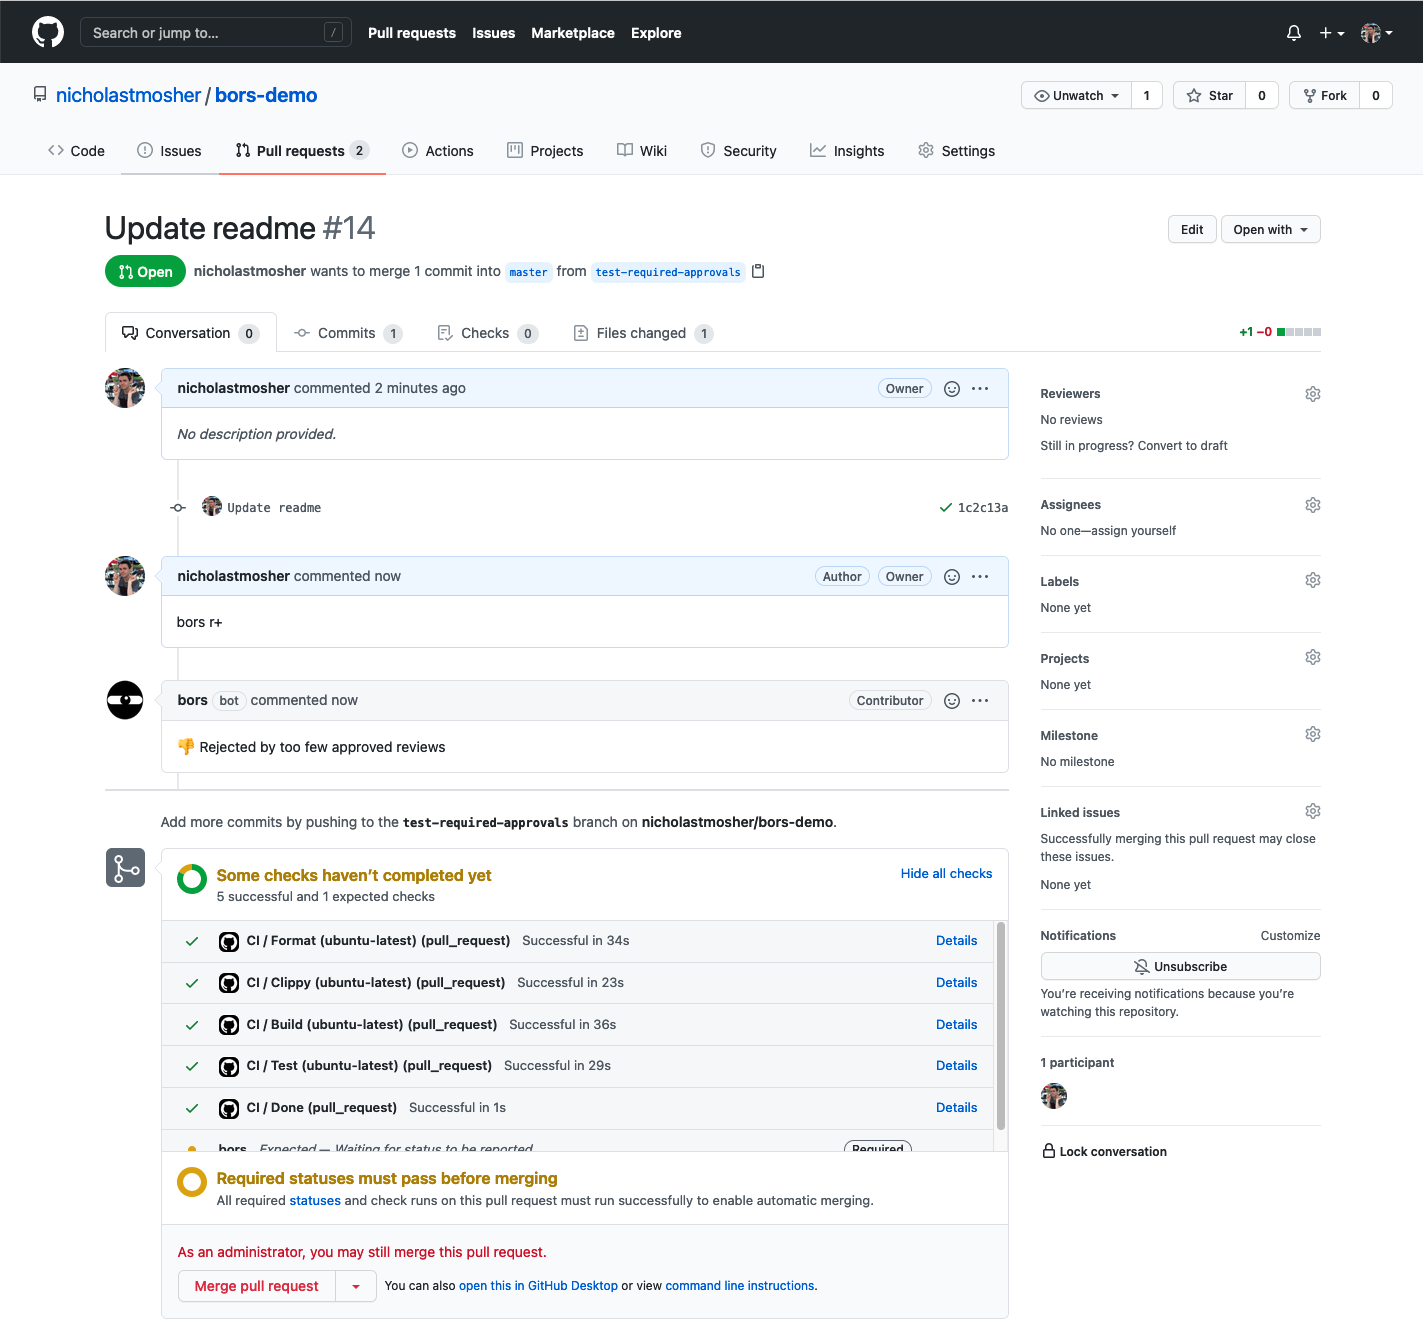 A screenshot of a GitHub PR where a bors r+ command was rejected due to too few approvals